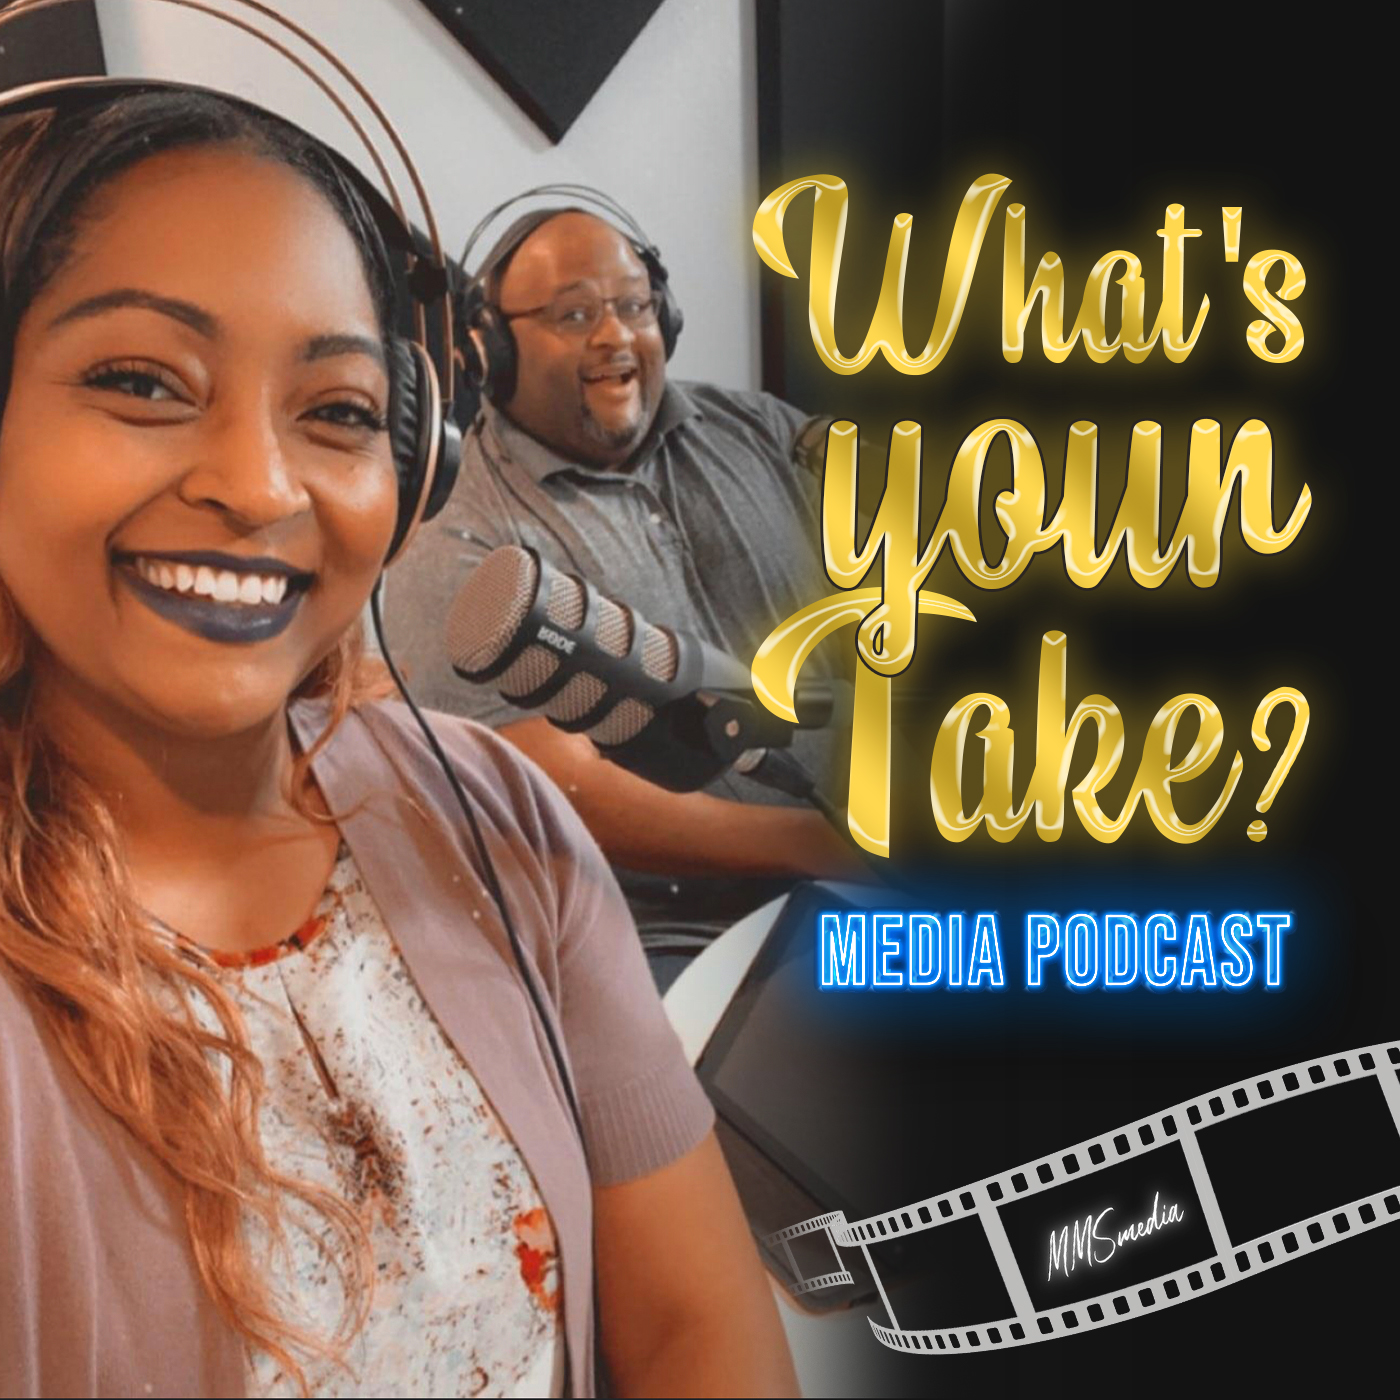 Artwork for " What's Your Take? Media" Podcast